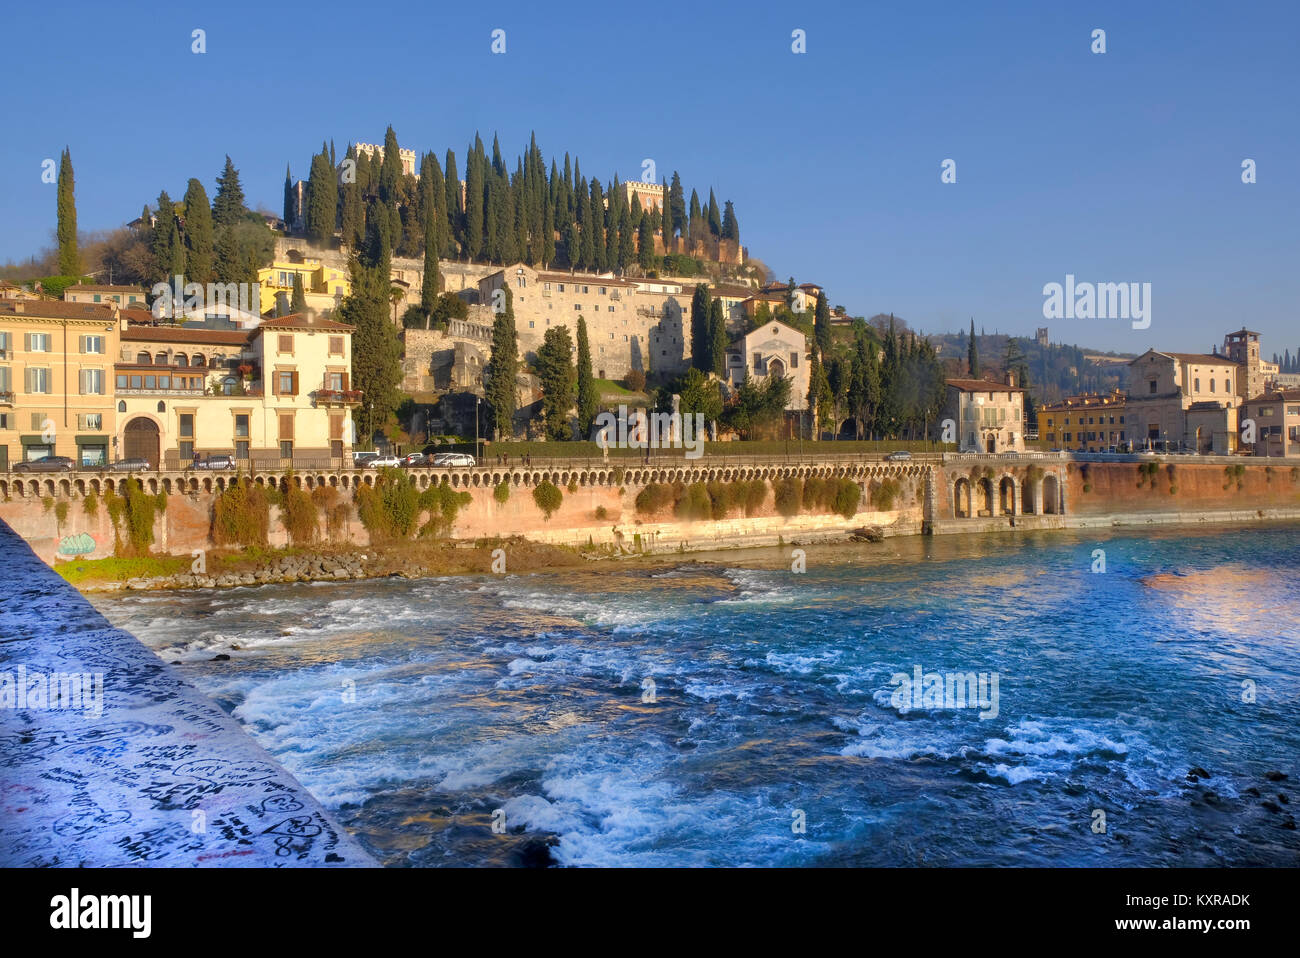 View of the Castel San Pietro and Adige river in Verona, Italy, Europe Stock Photo